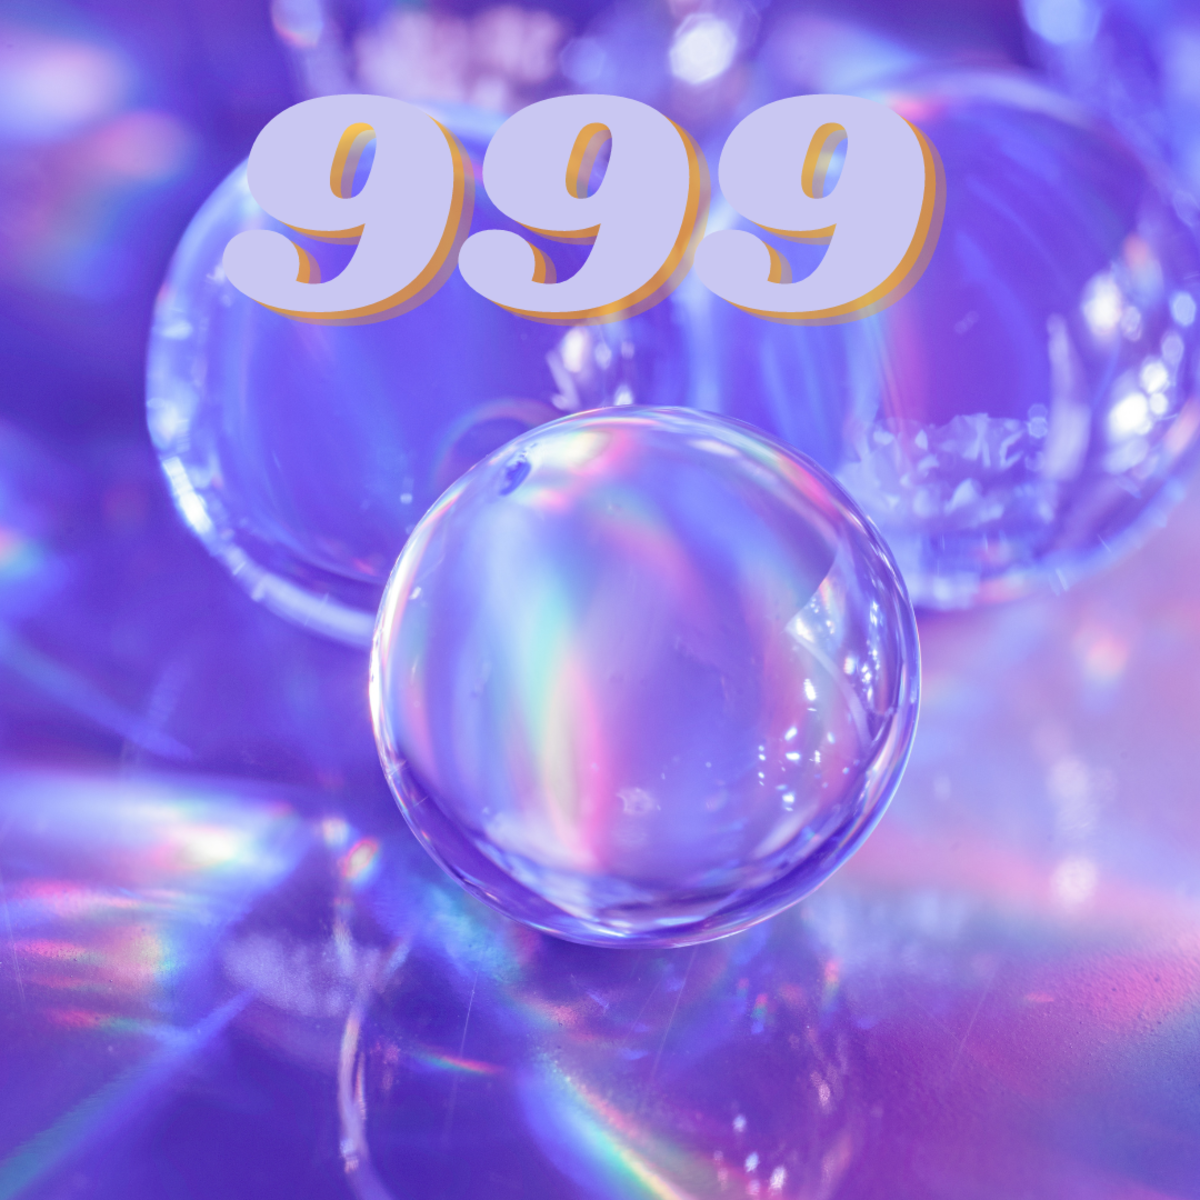 The numbers 999 indicate release.